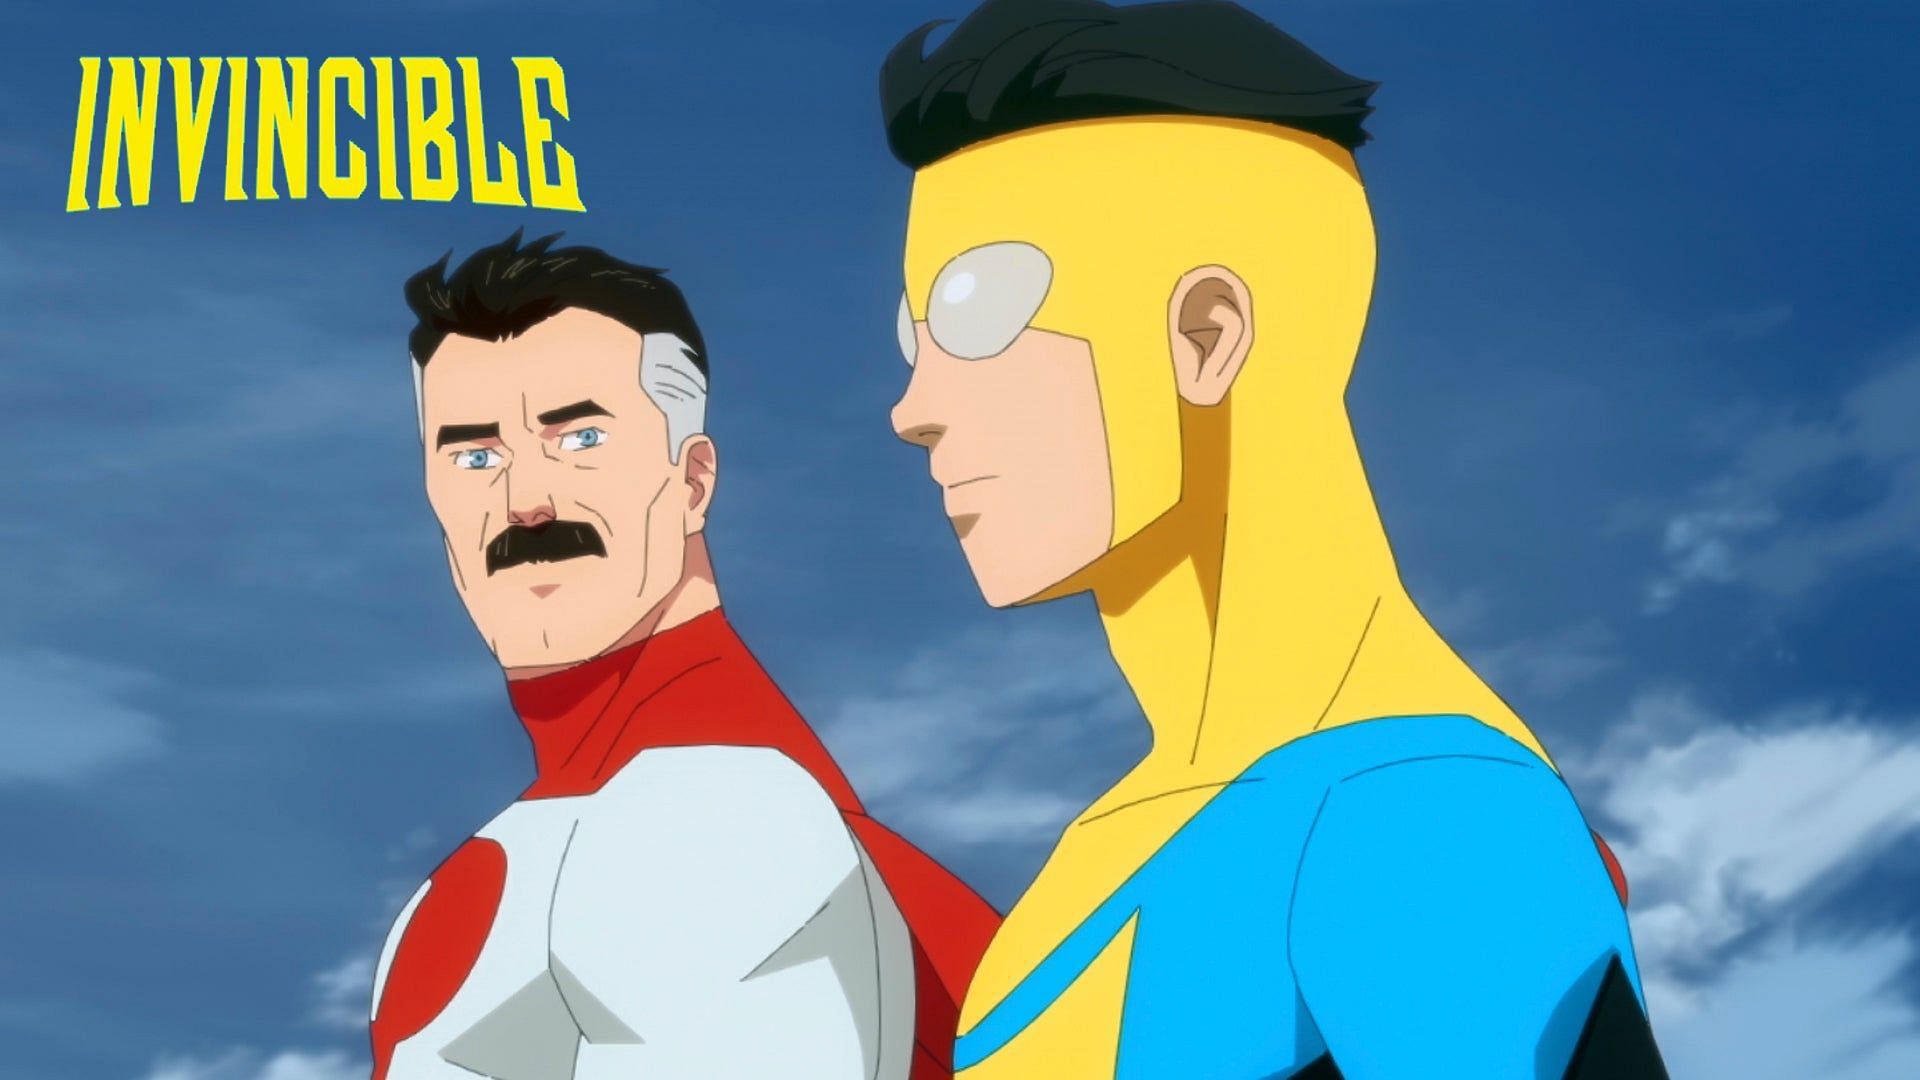 Everything known about Invincible Season 2 (Image via Amazon Prime Video)